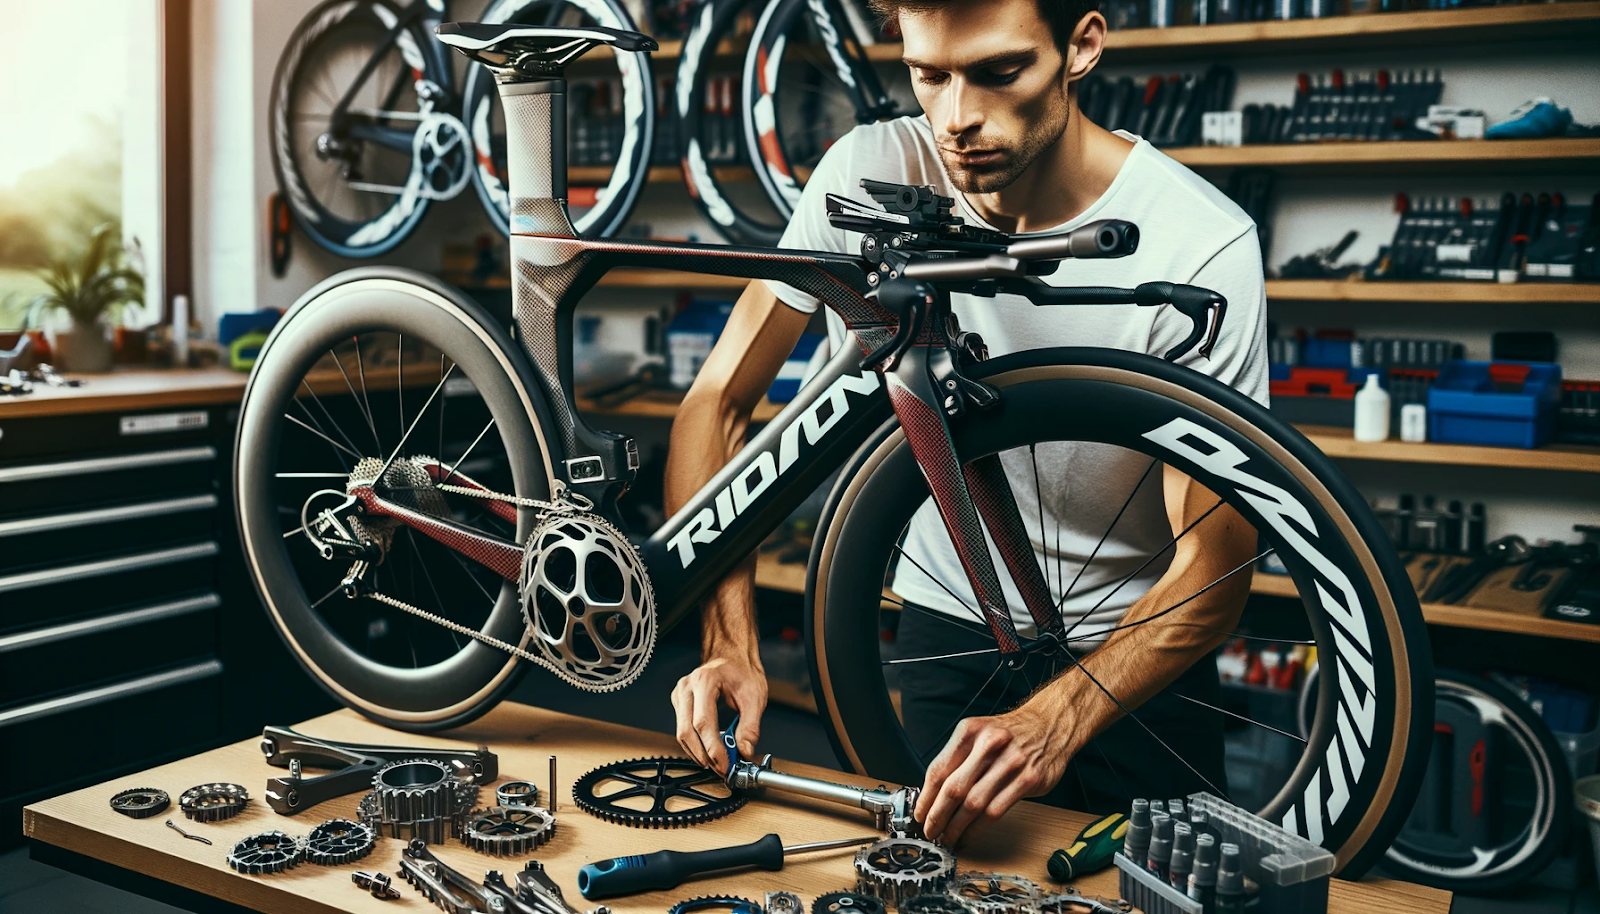 Photo of a triathlon bike inside a repair shop. A mechanic, with a focused expression, is examining a damaged component of the bike. Tools and spare parts are scattered around, emphasizing the complexity of the bike's maintenance. The scene should convey the idea of meticulous care and the expertise required for such high-end machines.